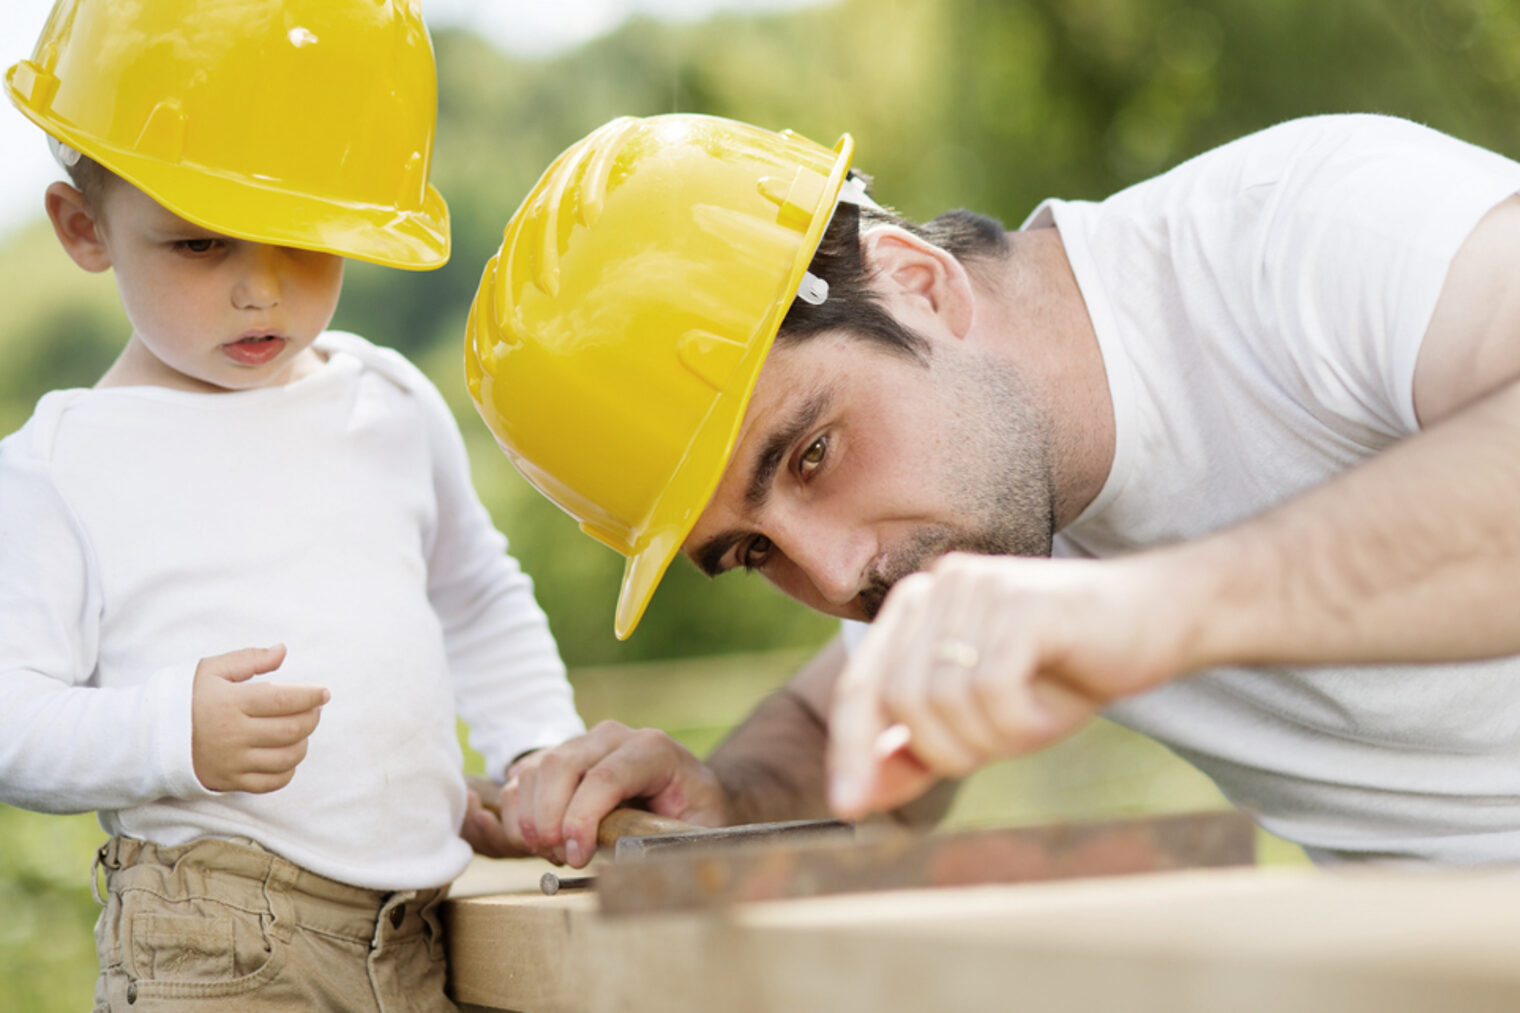 father, son, builder, building, Arbeitshelm Sohn Vater child, home, family, boy, dad, cute, parent, help, handsome, fix, build, tool, kid, worker, repair, human, work, equipment, house, teach, baby, activity, people, casual, construct, craft, relationship, communicate, housework, daddy, do it yourself, job, helper, exterior, green, learn, fun, measure, occupation, holding, wood, nature, industrial, toddler, together, woodwork, father, son, builder, building, child, home, family, boy, dad, cute, parent, help, handsome, fix, build, tool, kid, worker, repair, human, work, equipment, house, teach, baby, activity, people, casual, construct, craft, relationship, communicate, housework, daddy, do it yourself, job, helper, exterior, green, learn, fun, measure, occupation, holding, wood, nature, industrial, toddler, together, woodwork 56091358